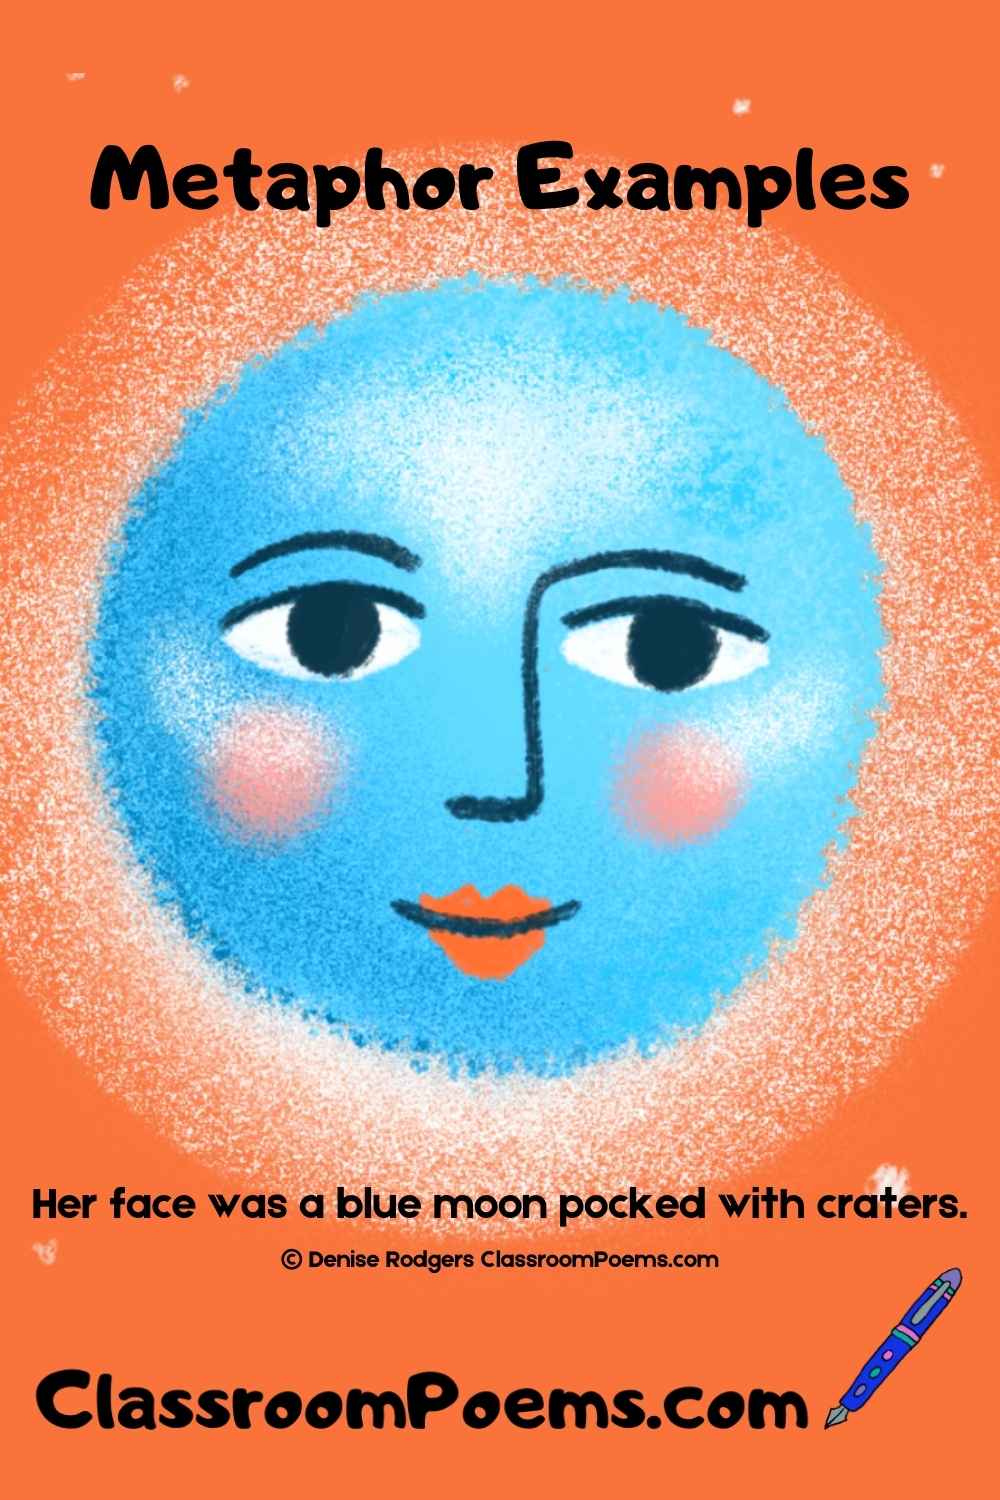 Blue Moon metaphor example by Denise Rodgers on  ClassroomPoems.com.